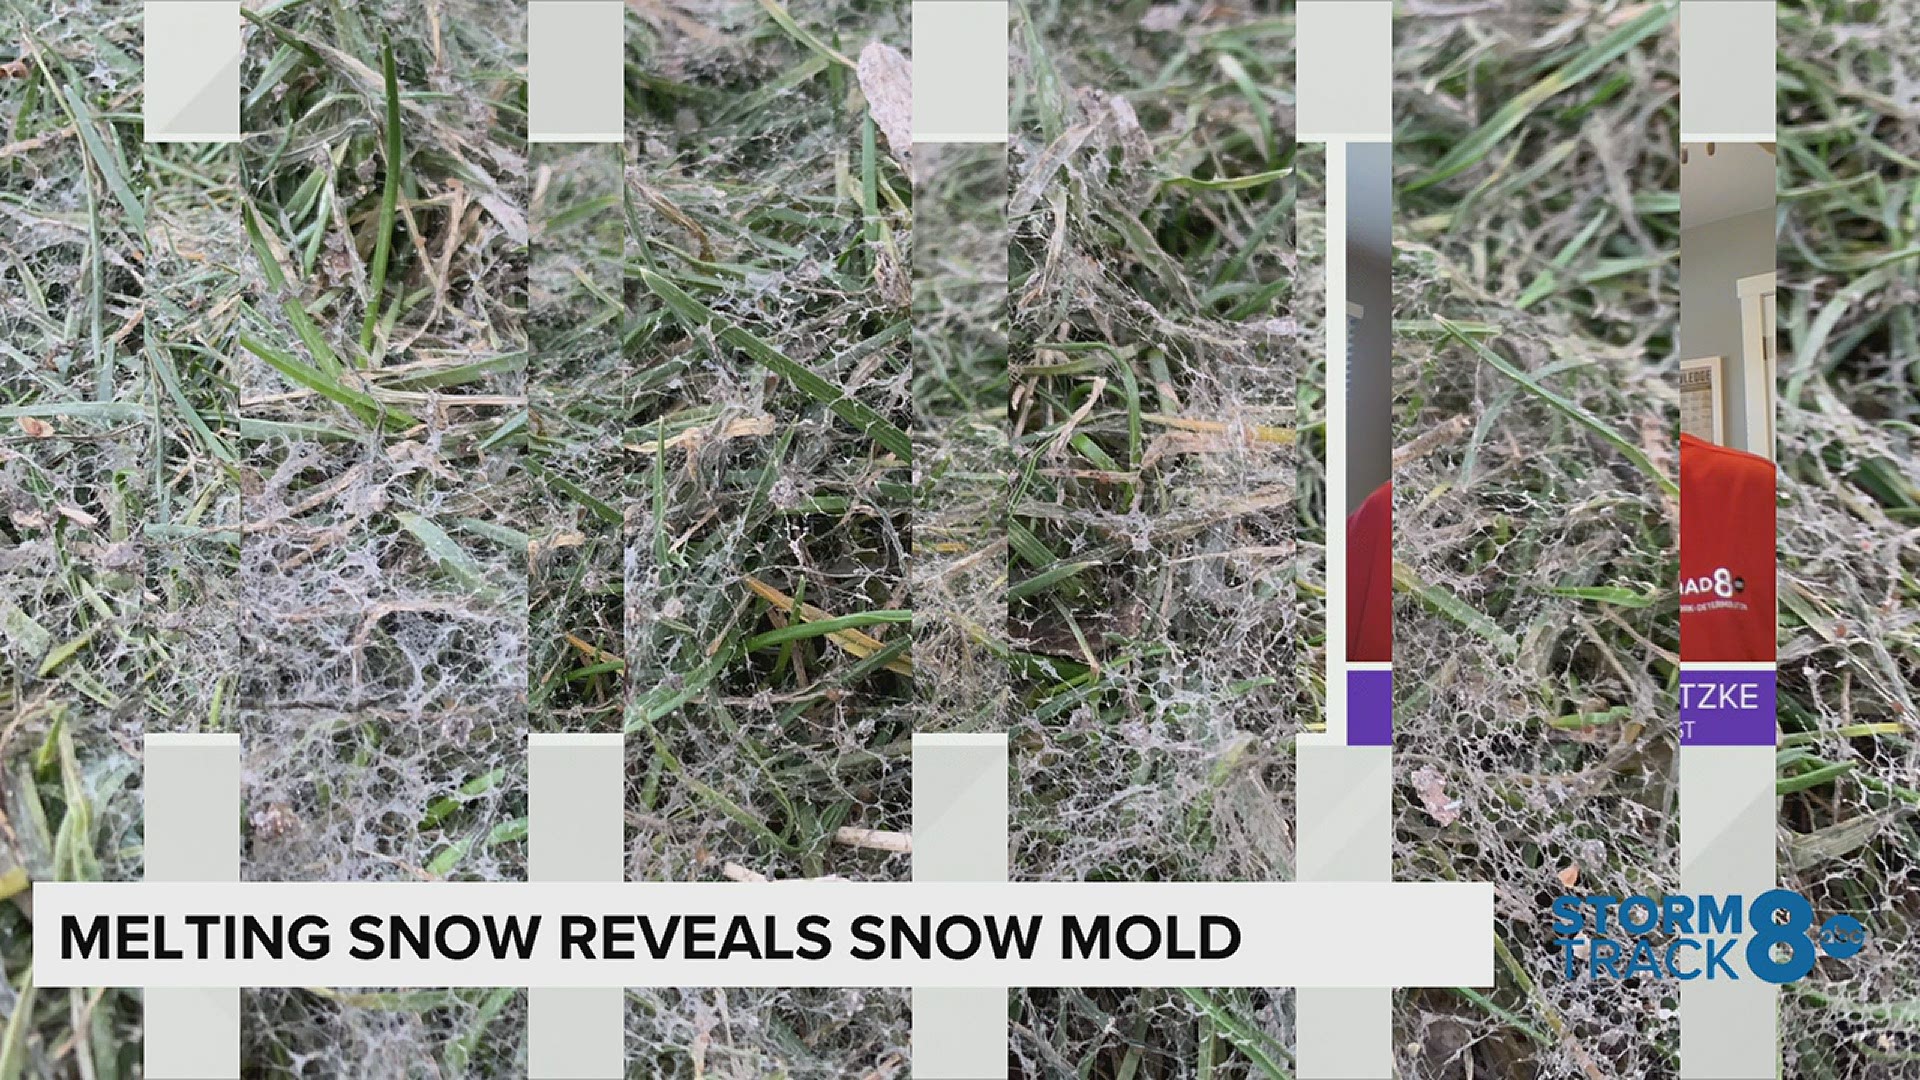 A long-lasting snowpack and unfrozen ground has created the perfect breeding ground for this winter mold